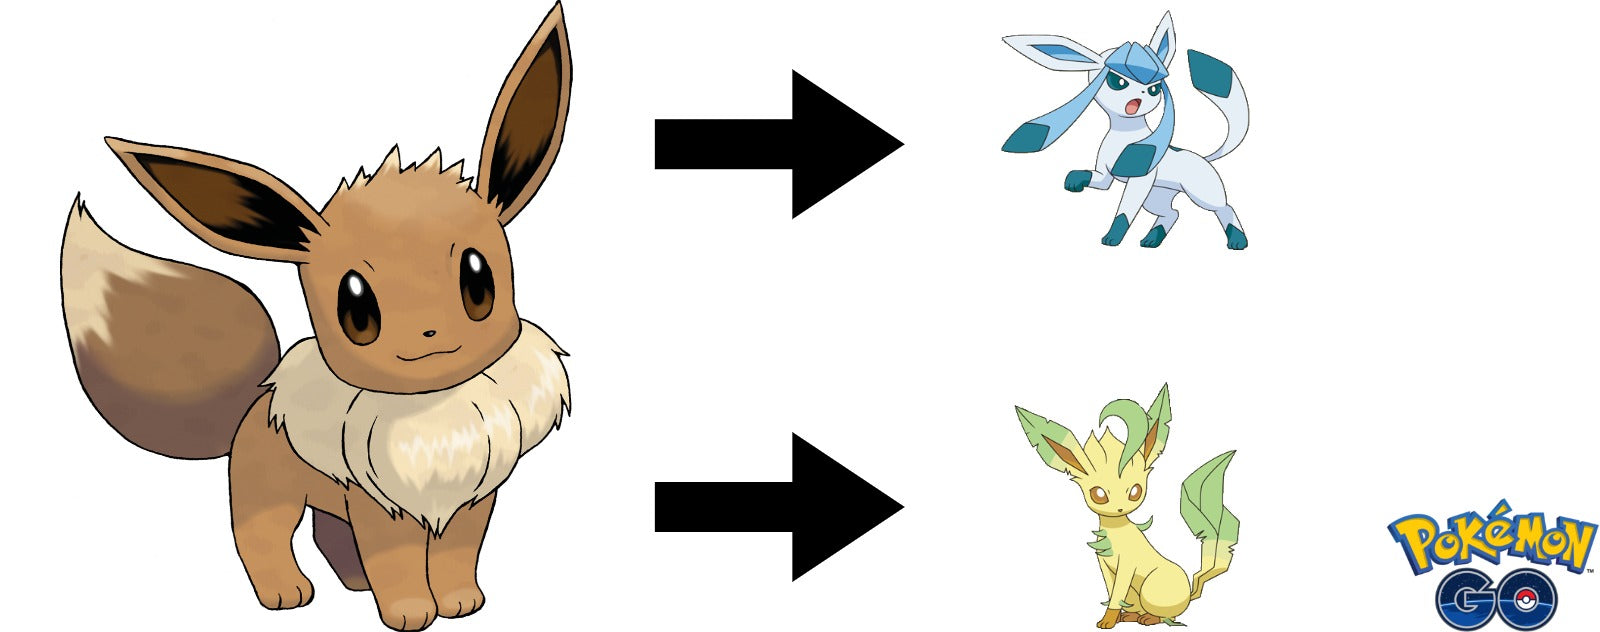 How to evolve Eevee in Pokemon Go: All Eevee evolutions and names